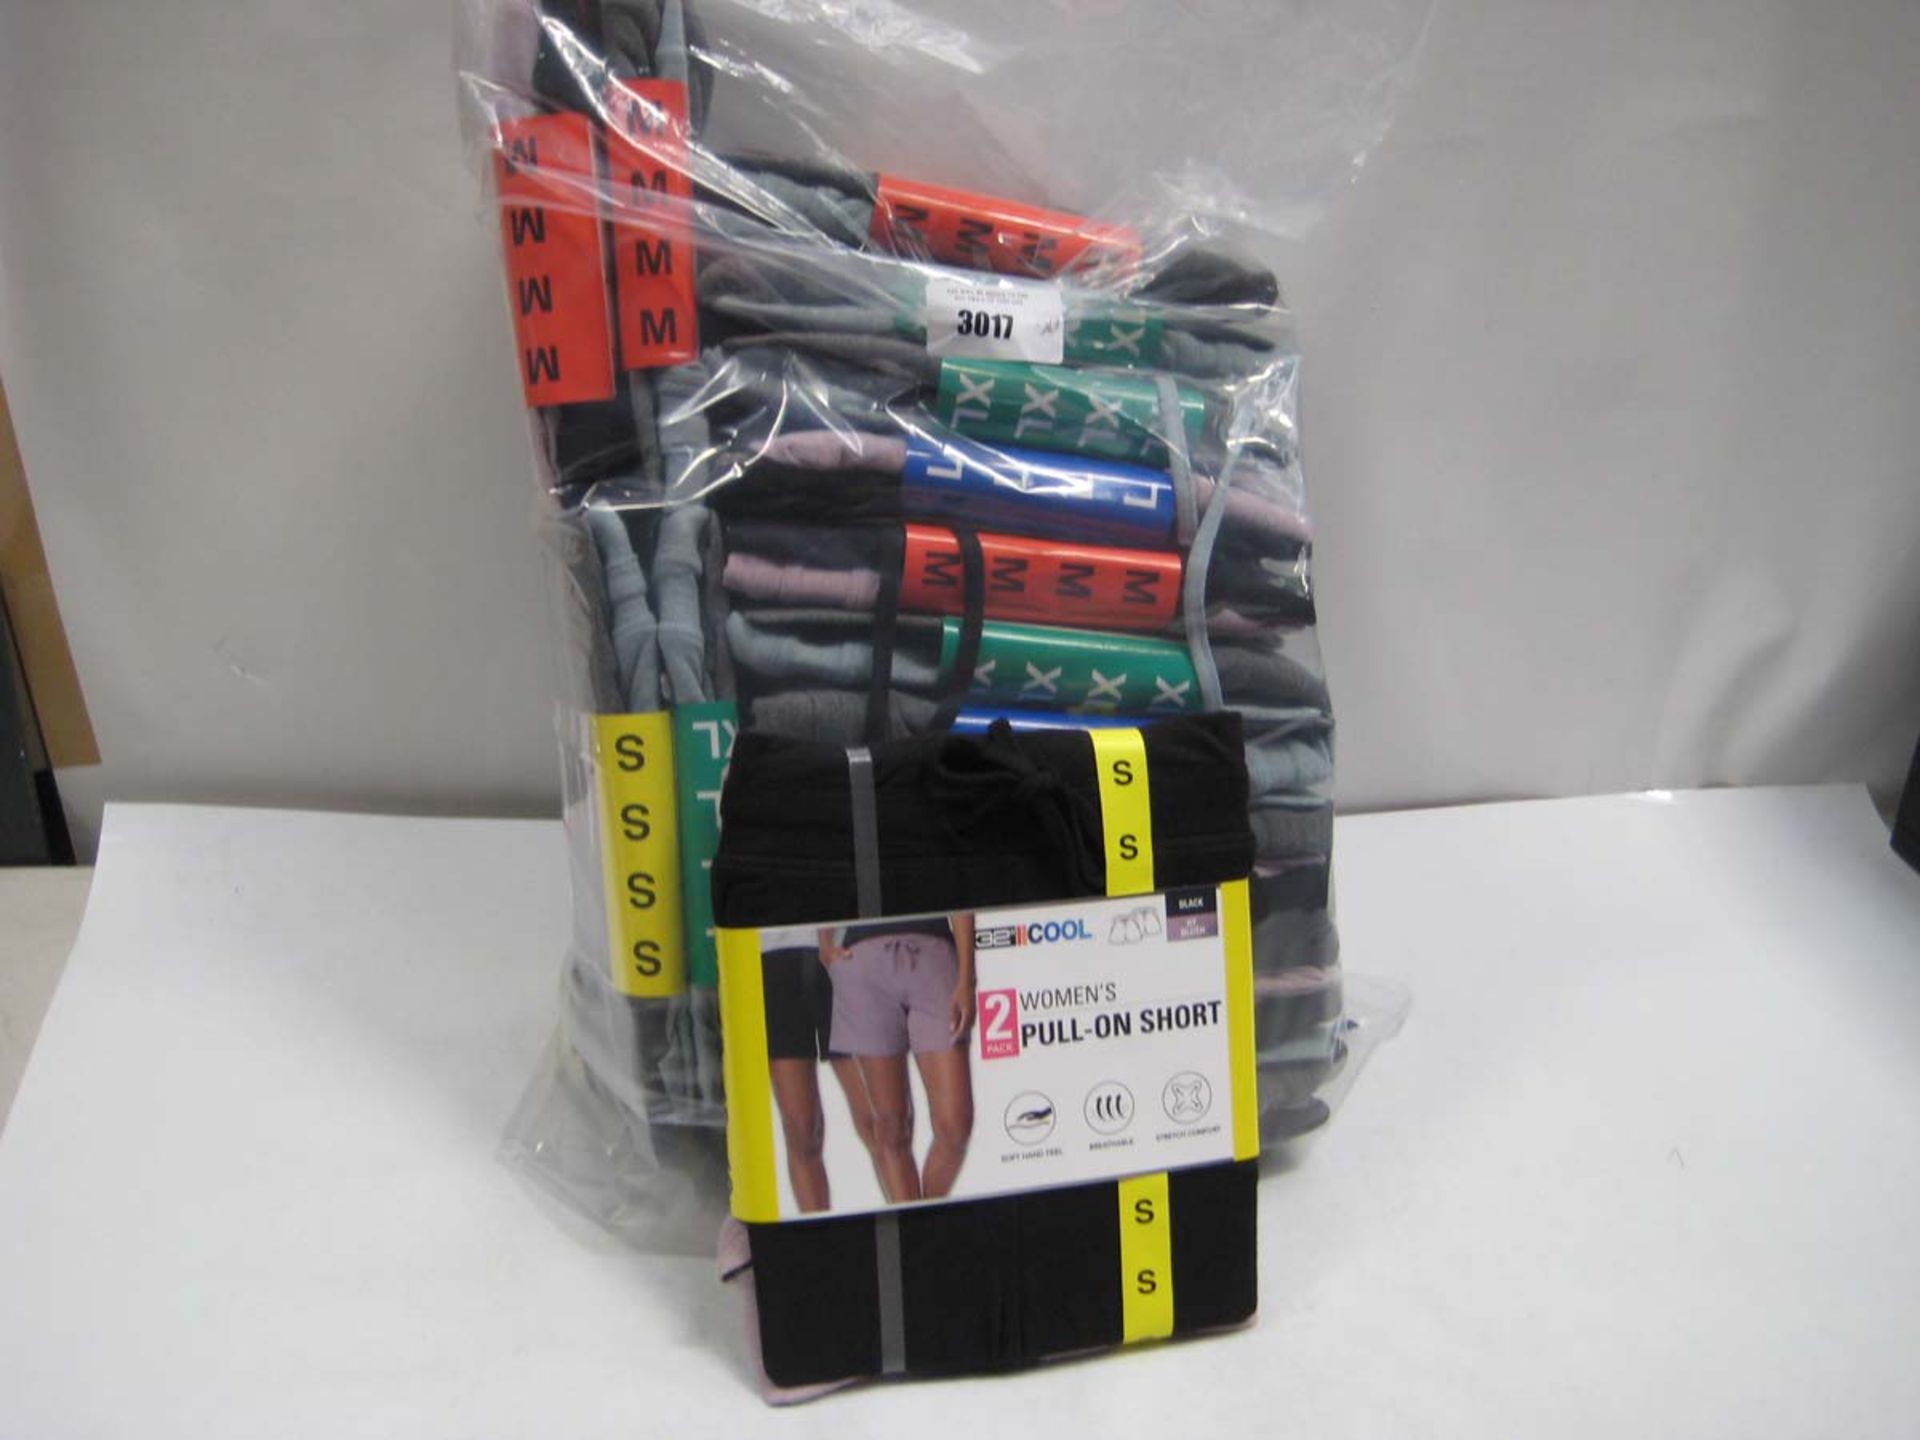 Bag containing 10 twin pack, 32 degrees cool womens pull on shorts, various sizes and colours.